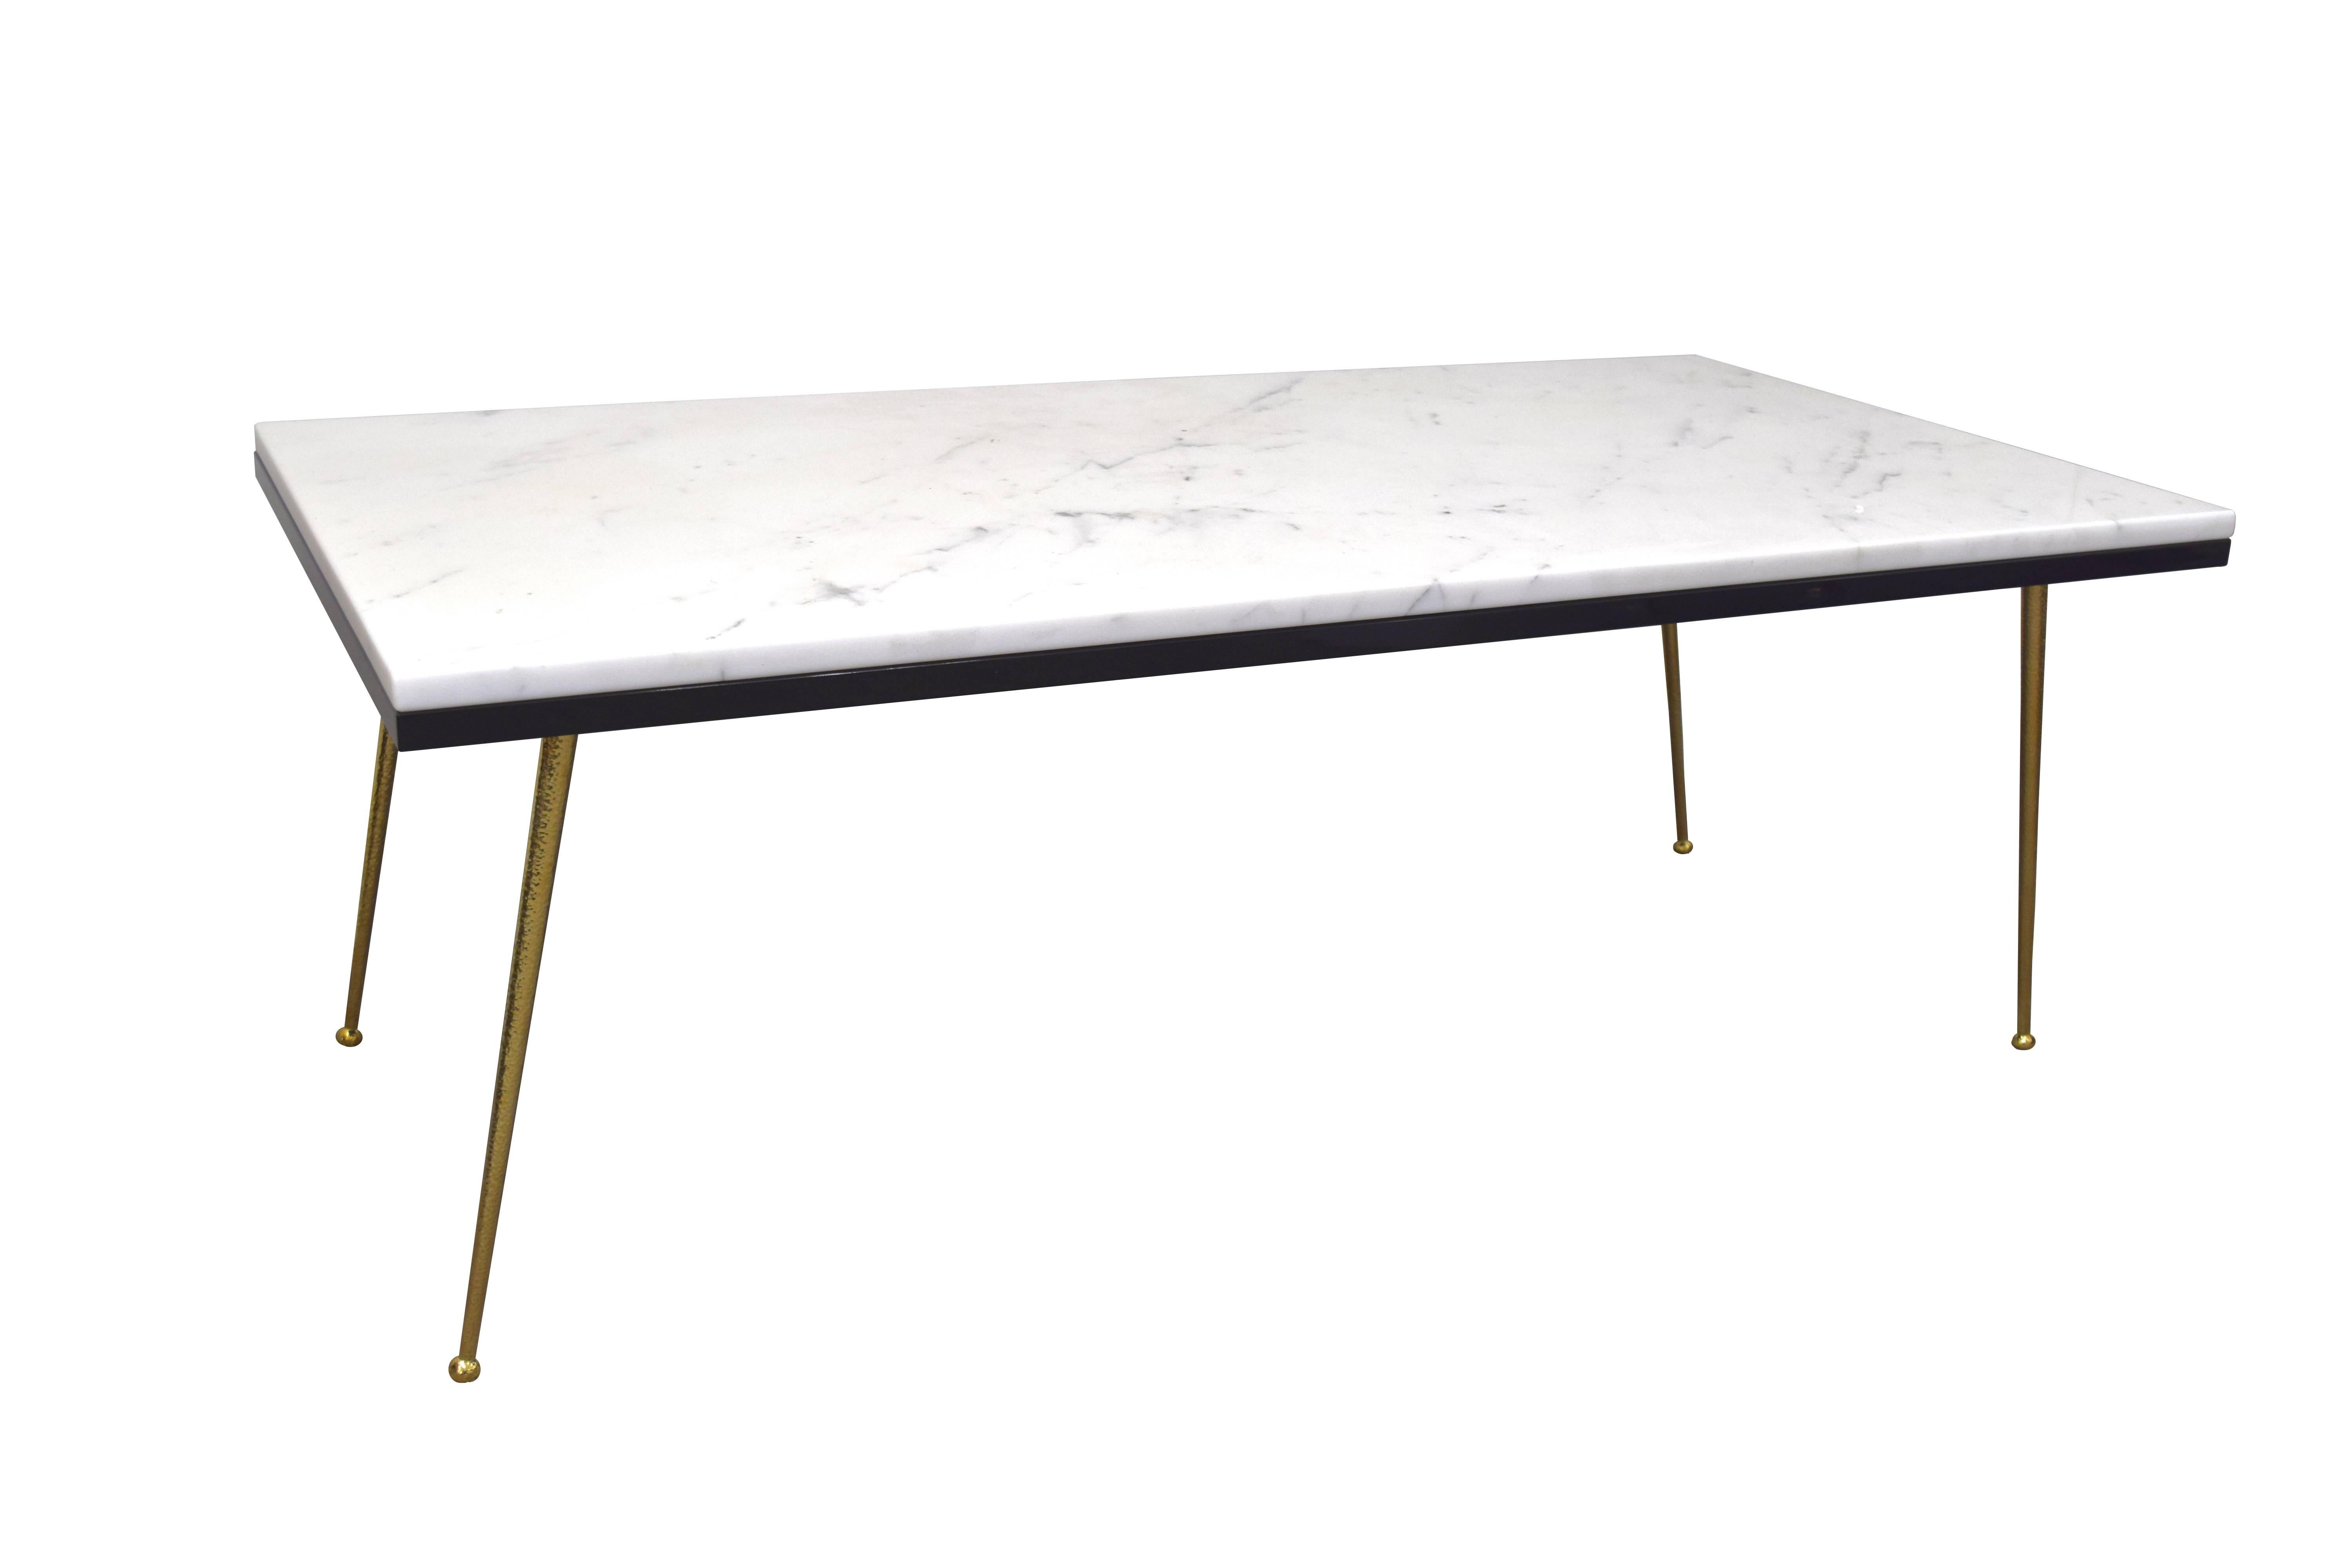 The marble Vivier coffee table, designed by Irwin Feld design for CF MODERN, is a great way to center company around a Classic conversation piece. The table is made from a slab of Carrara marble over a high gloss, black lacquered sub top. Standing